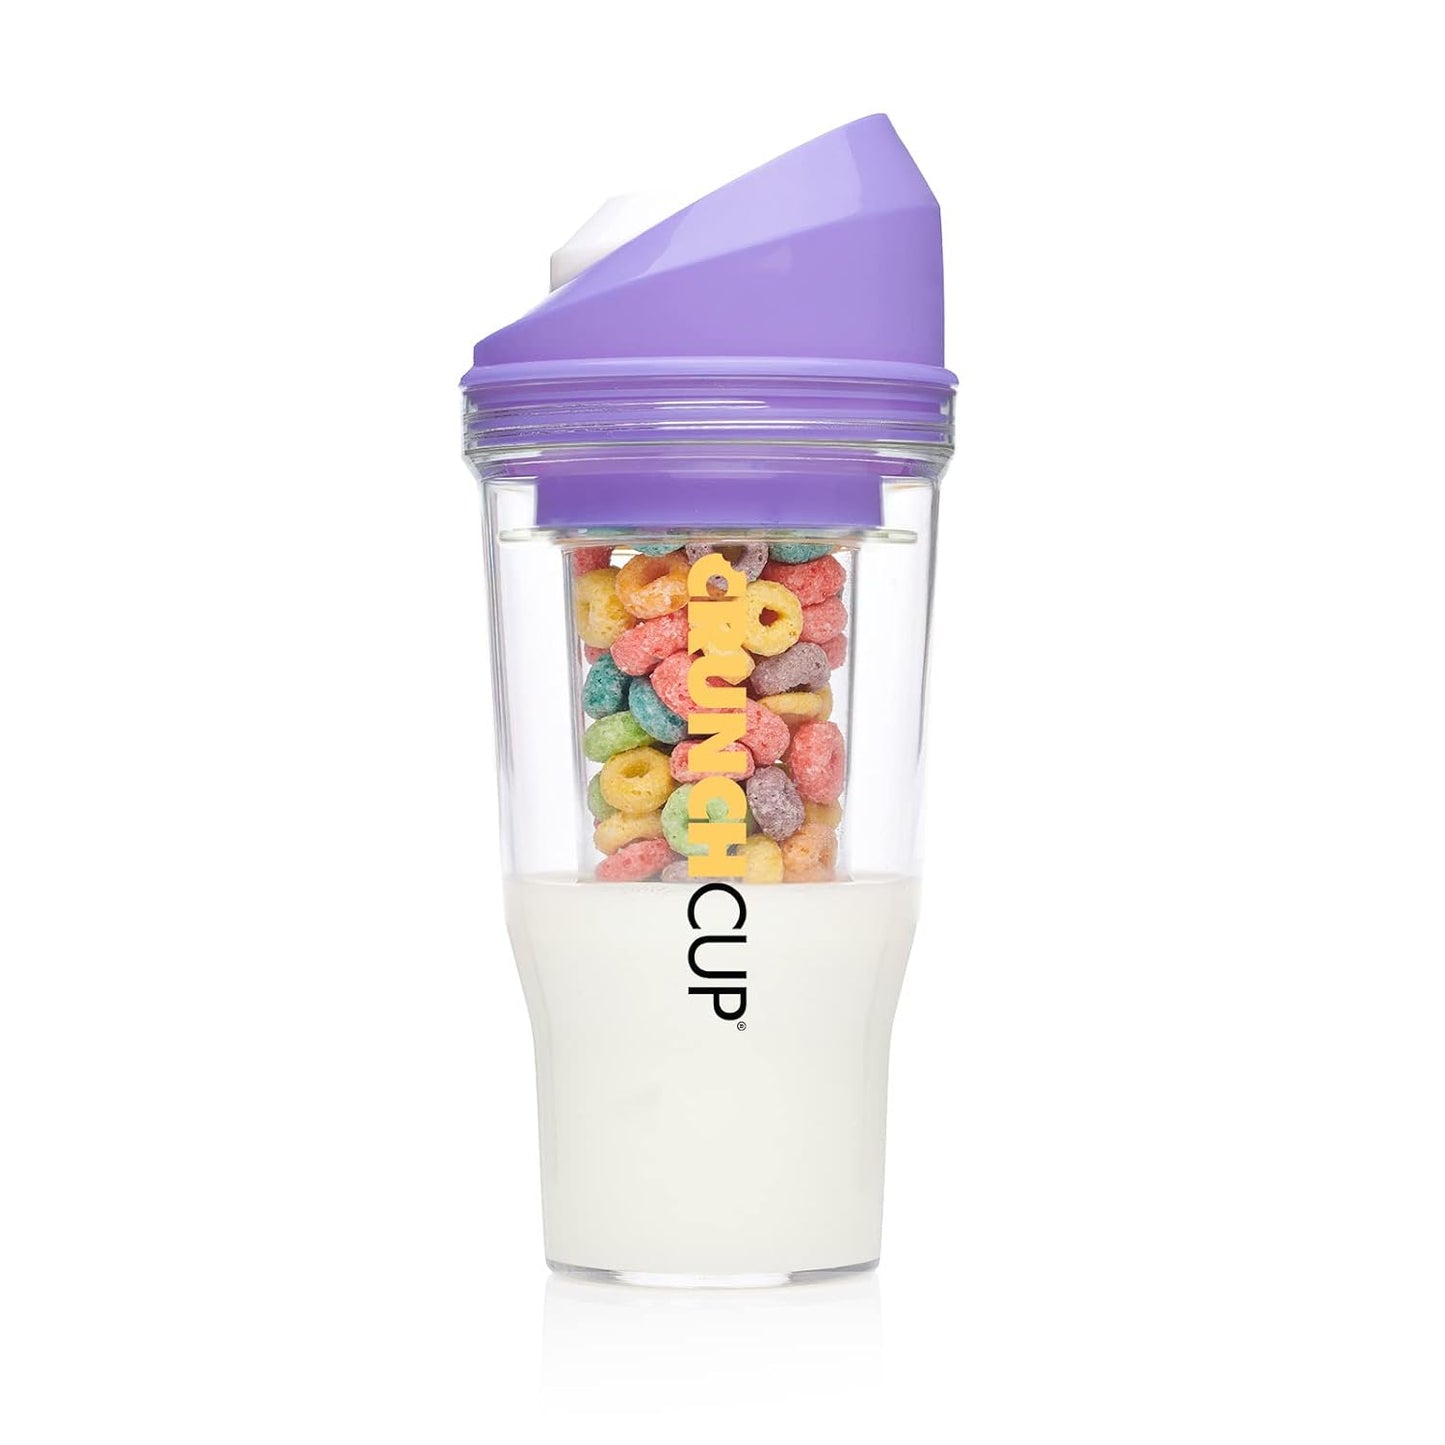 CRUNCHCUP the XL Blue - Portable Plastic Cereal Cups for Breakfast on the Go, to Go Cereal and Milk Container for Your Favorite Breakfast Cereals, No Spoon or Bowl Required